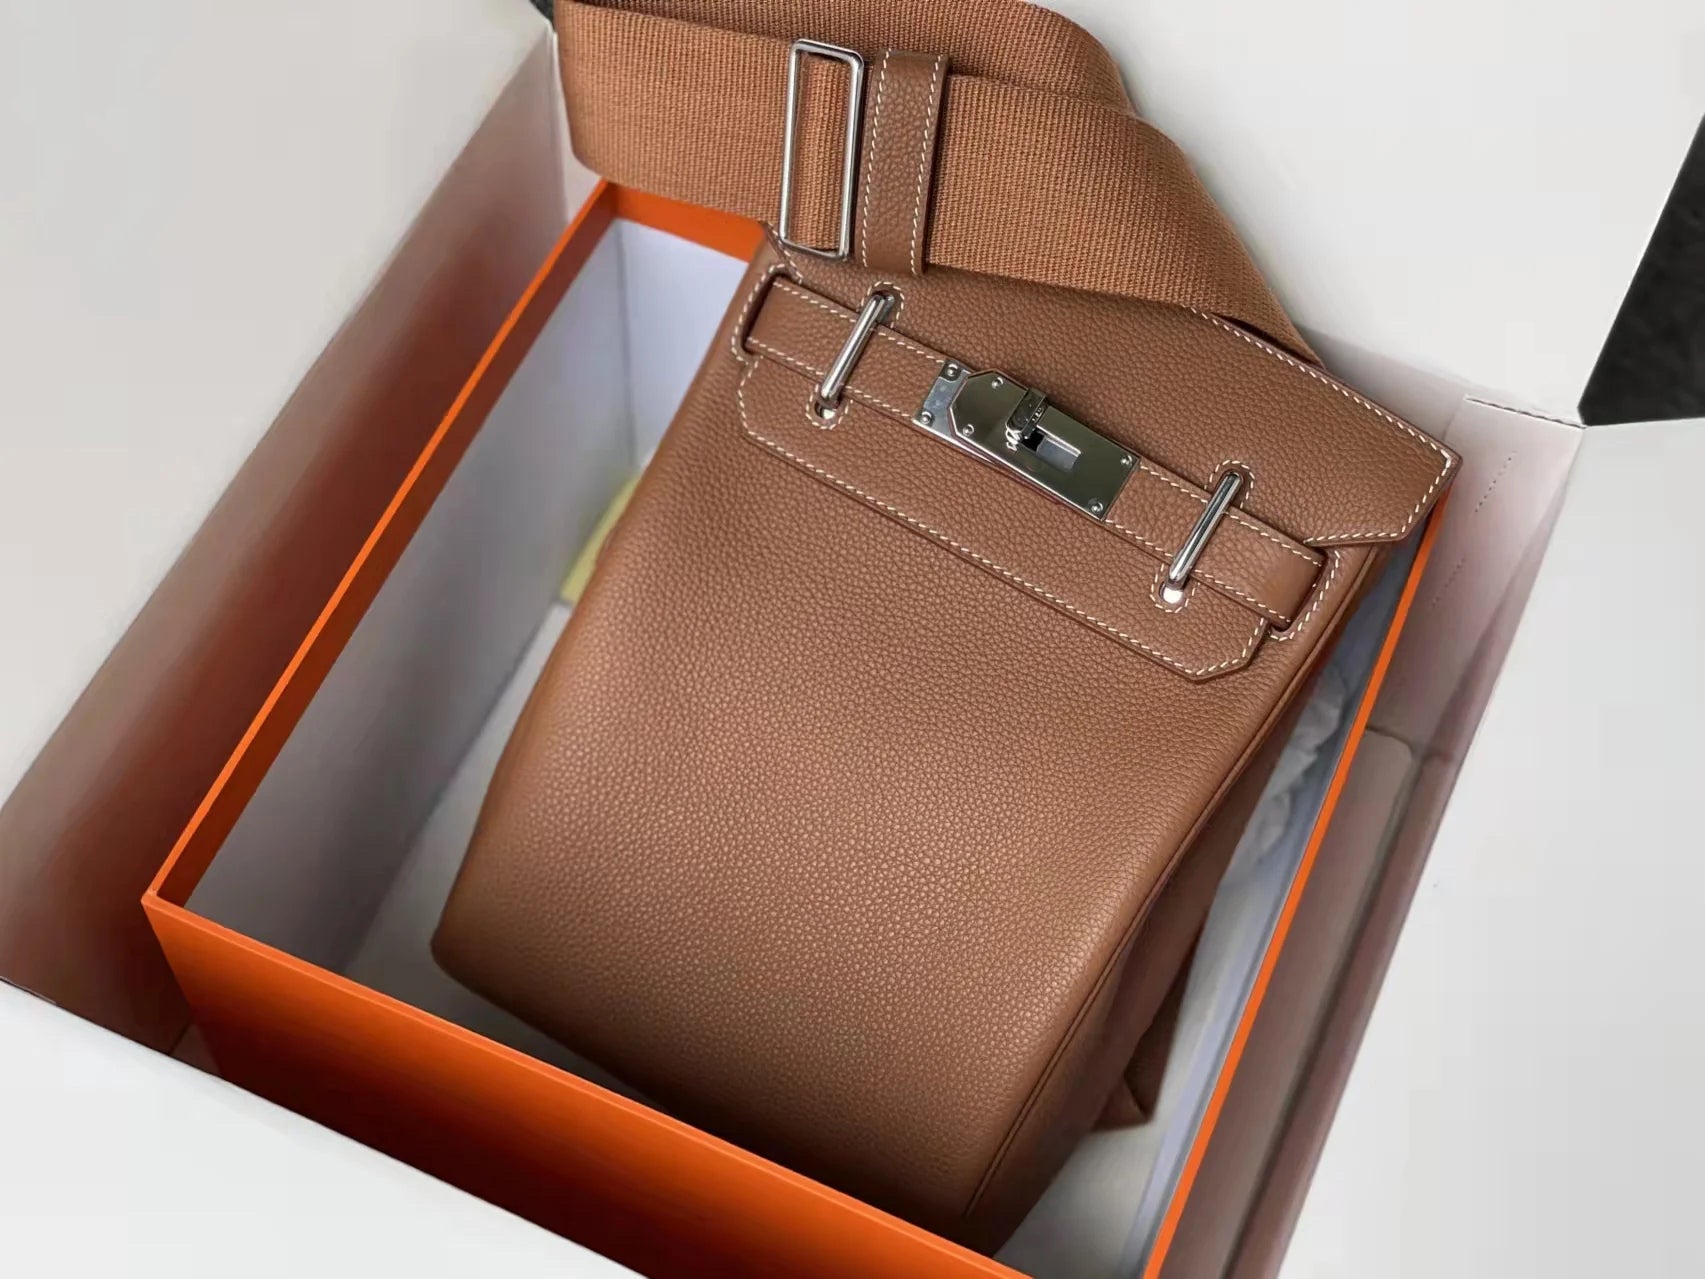 I bought this Hermes HAC a dos, would a basic human be able to